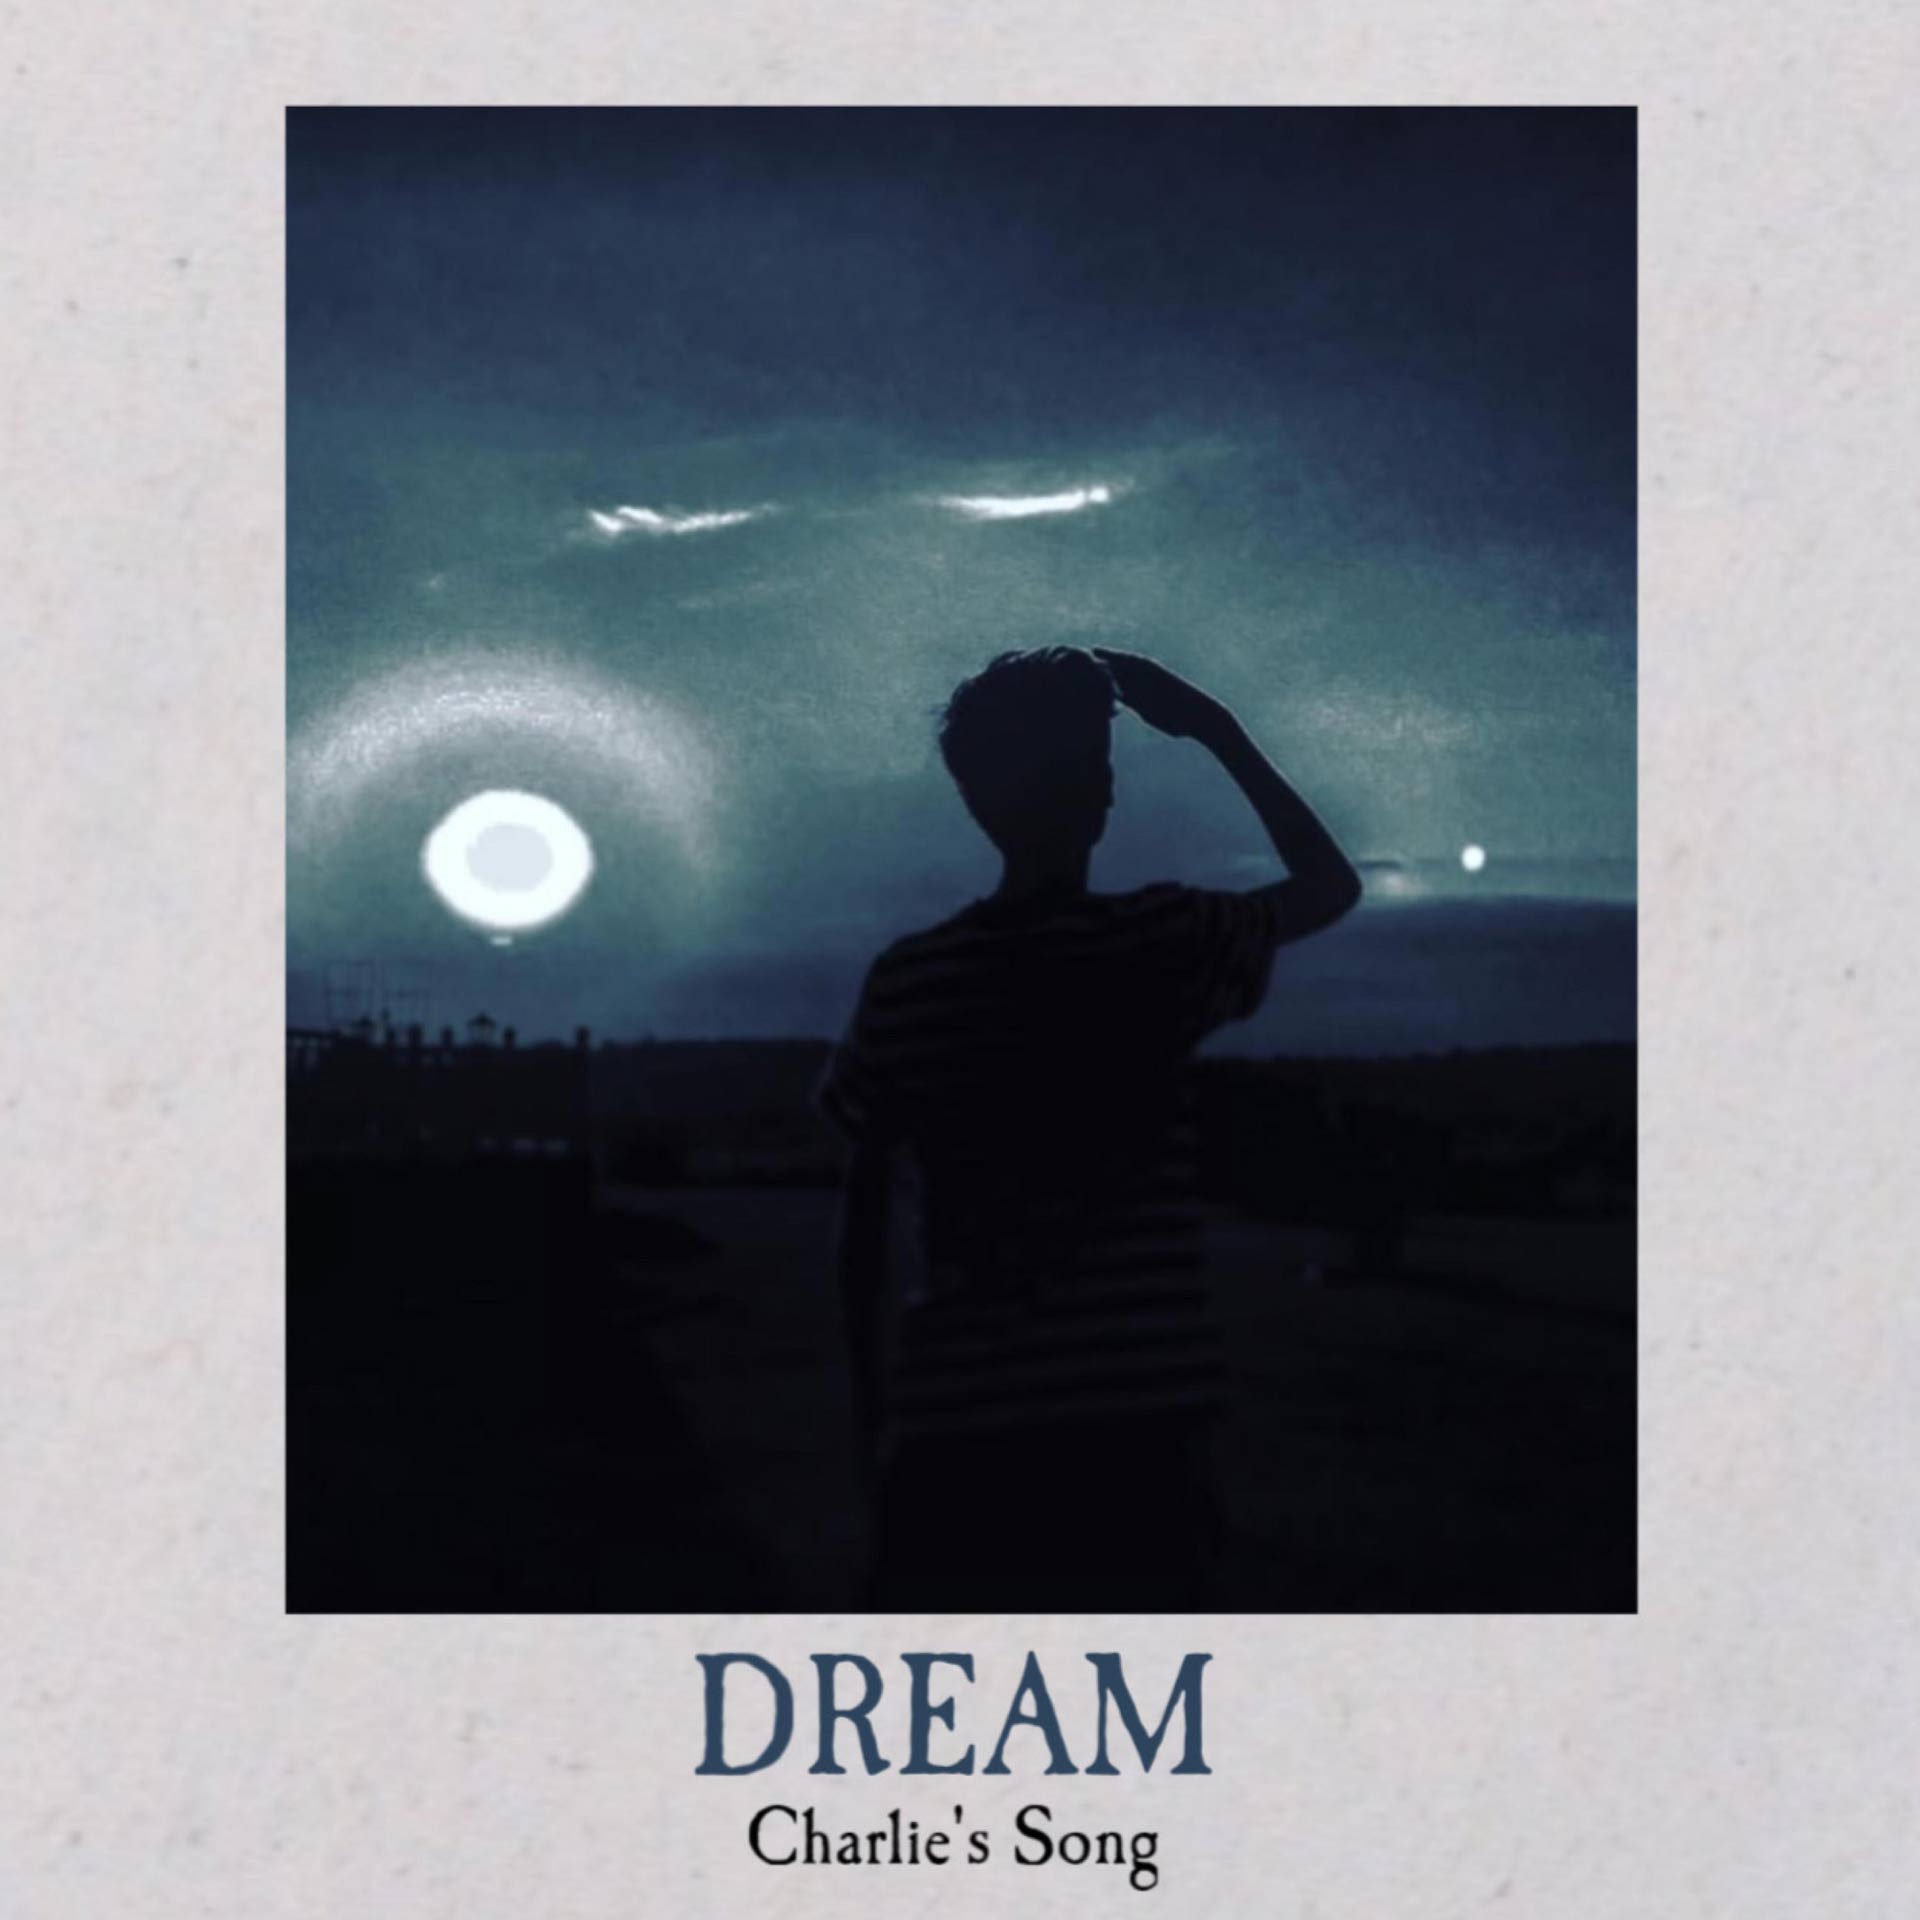 Dream (Charlie's Song)